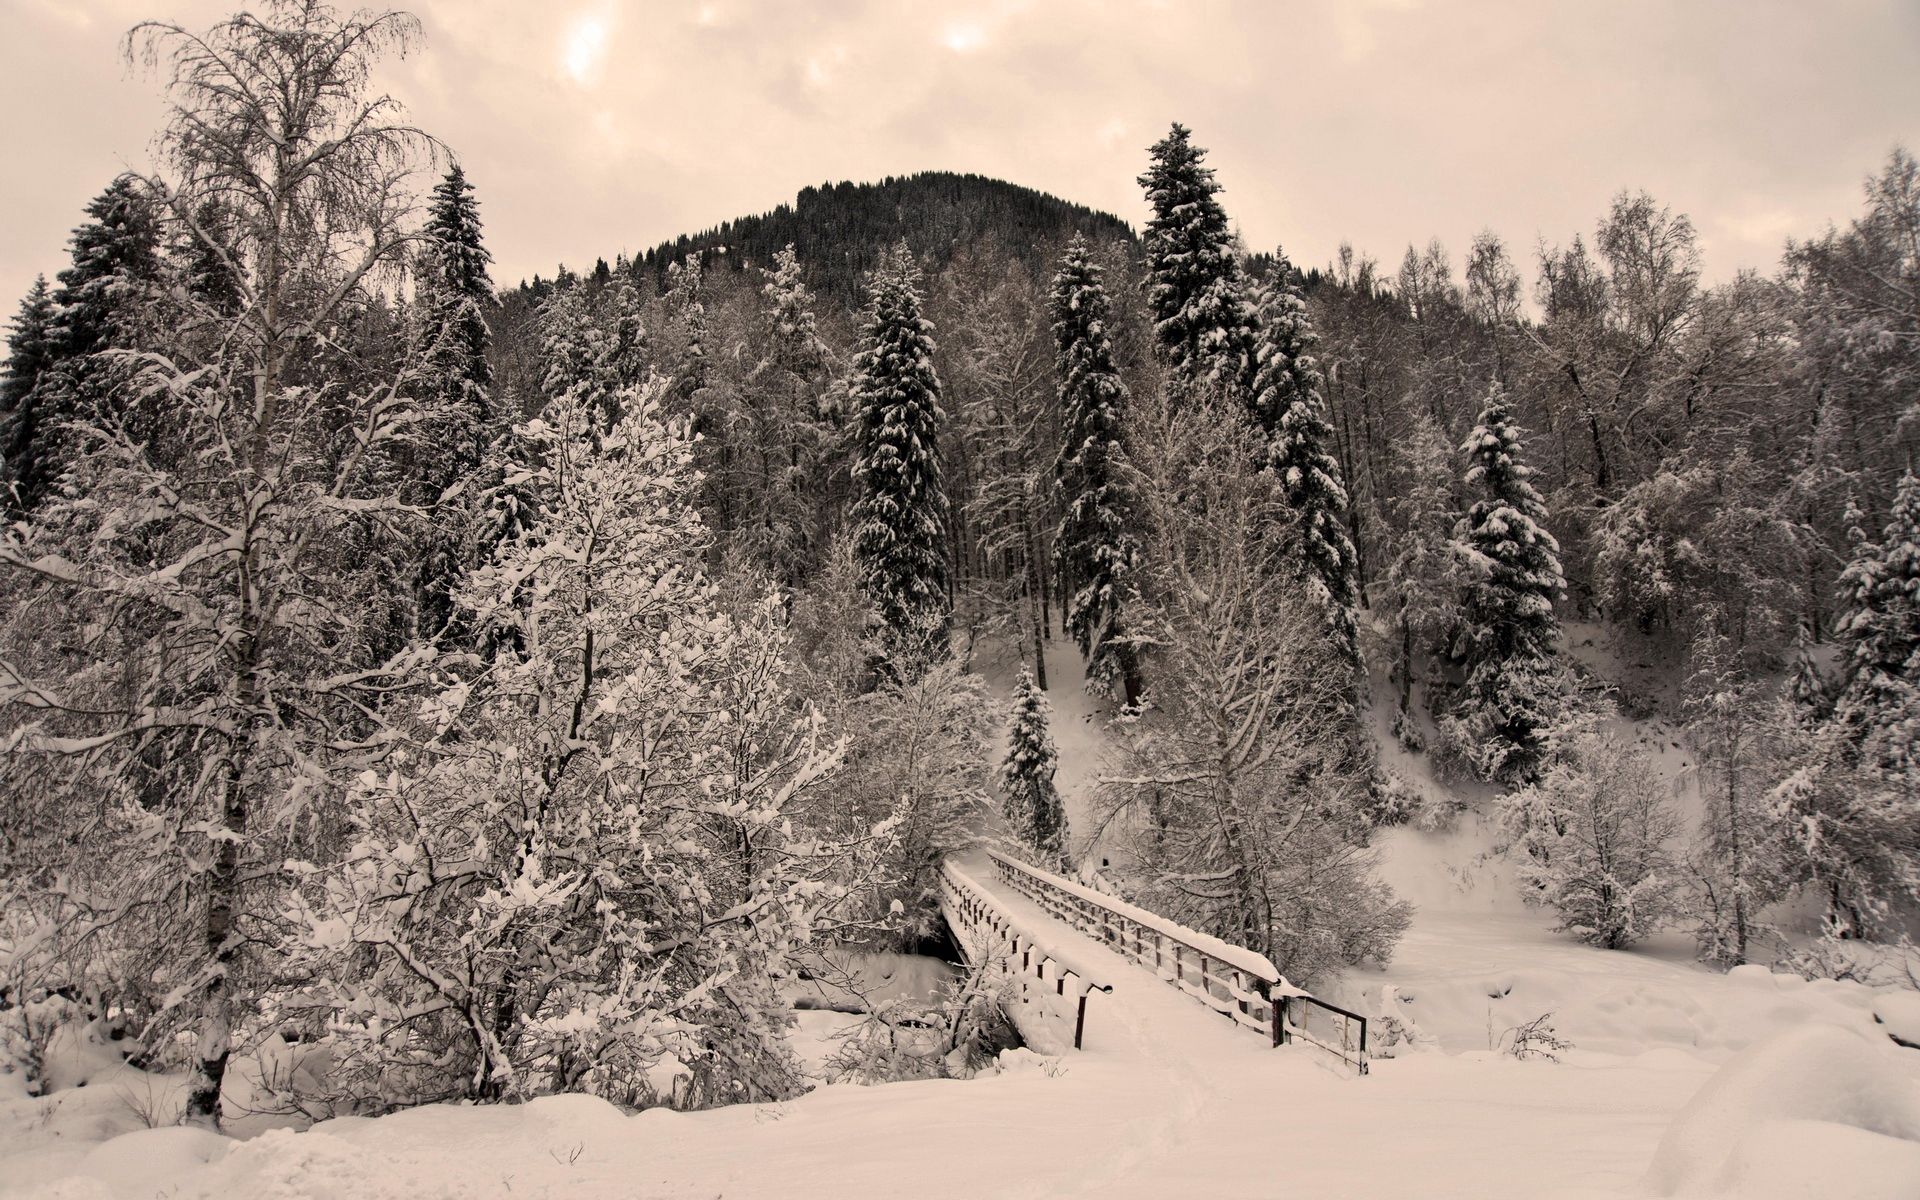 creepy, winter, nature, trees, snow, bridge, frost, hoarfrost, gloomy, severity, heaviness wallpapers for tablet